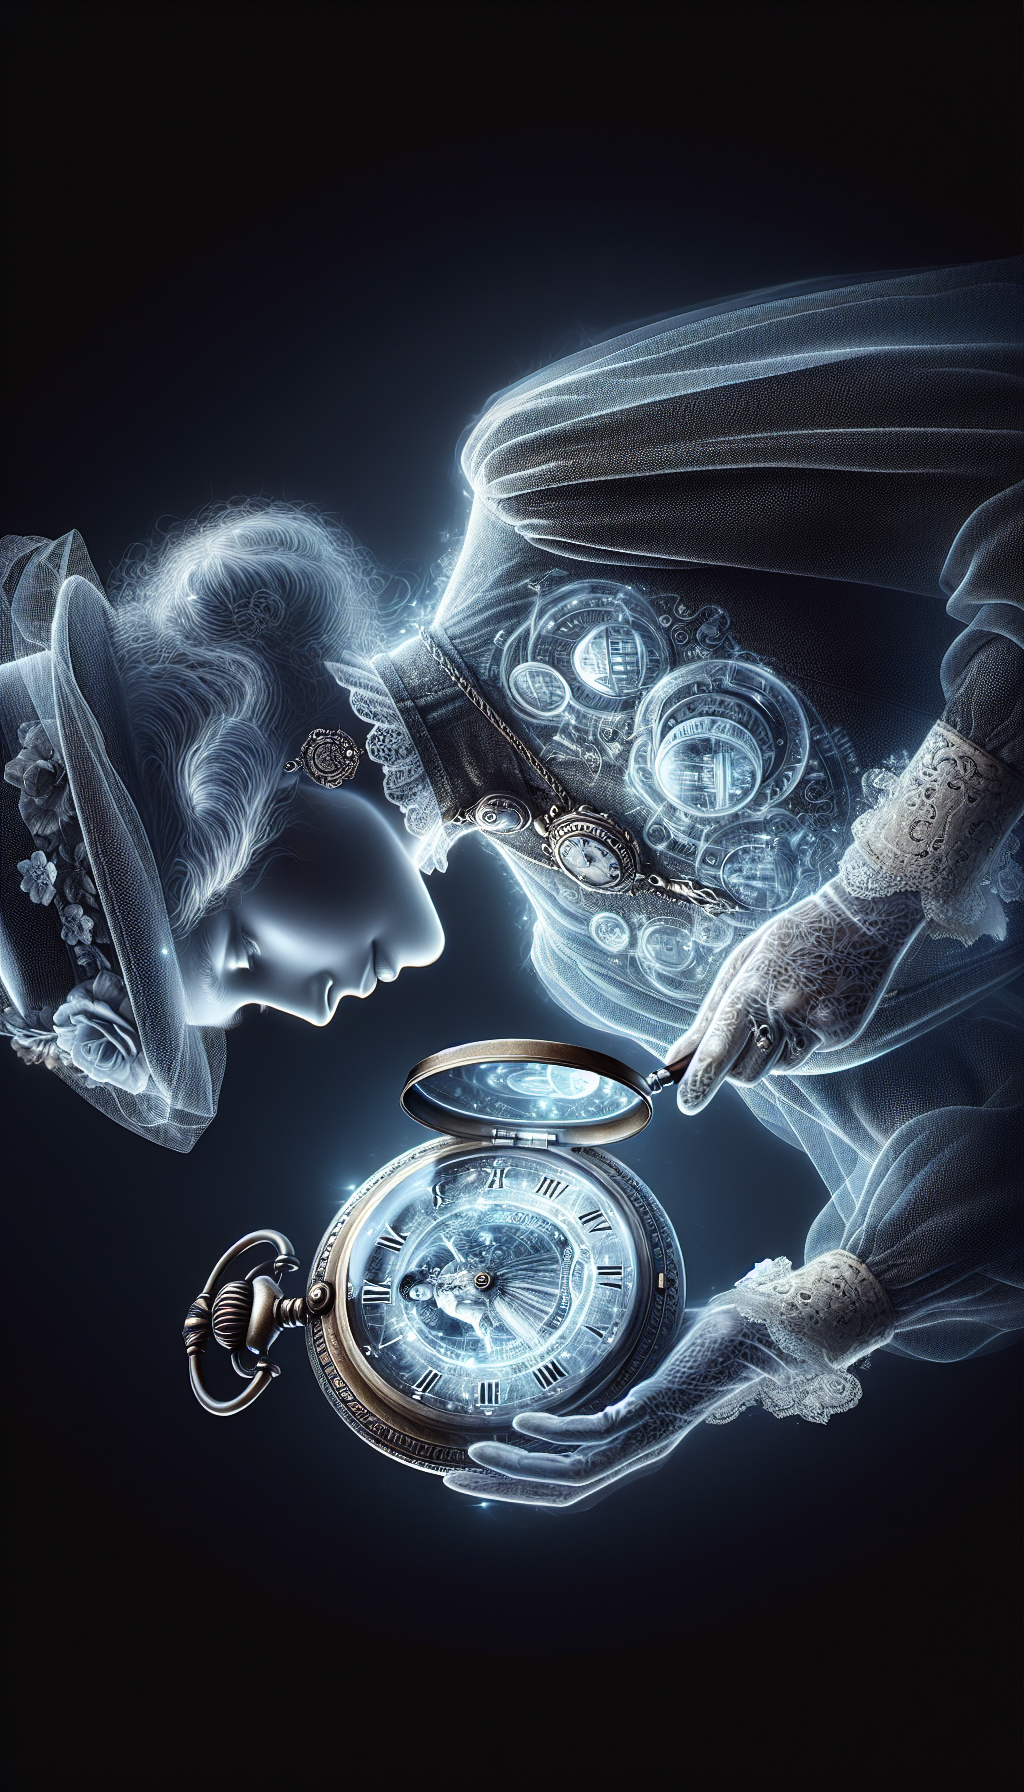 An elegant, semi-transparent lady ghost, draped in Victorian attire, lovingly gazes at a shimmering Lady Elgin watch that dangles from her ethereal wrist. The watch's face is a portal revealing a montage of historical milestones, while the ghost's other hand holds an appraisal magnifying glass, highlighting the etched value beneath the watch's faded engraving.